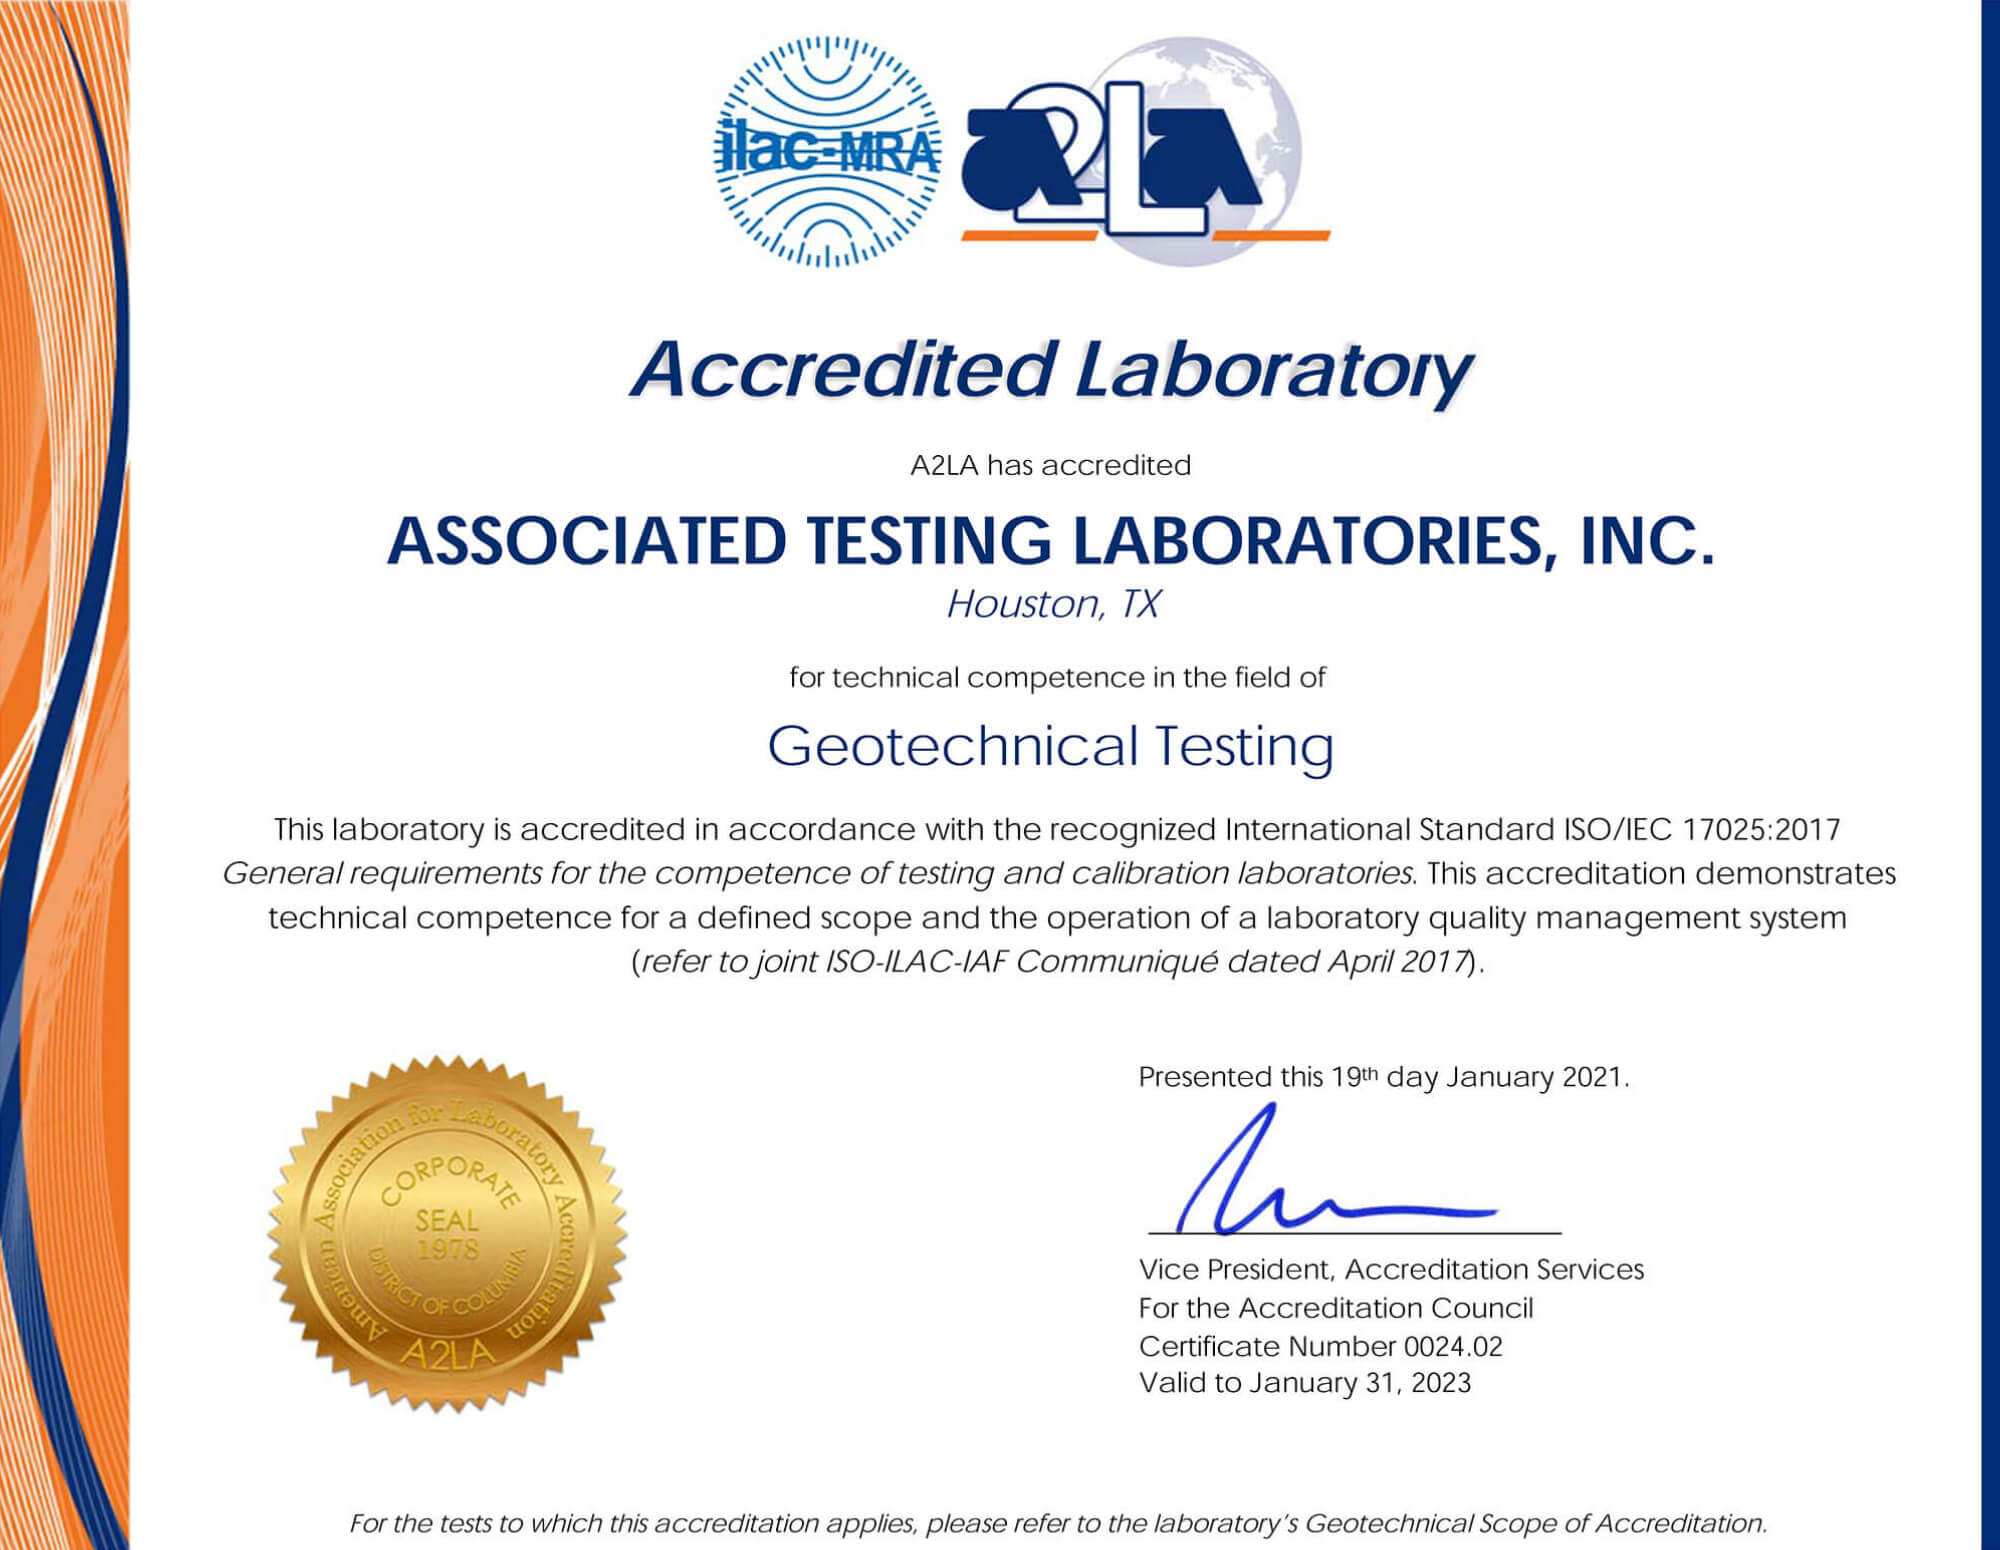 HUB, DBE, MBE, WOSB, woman-owned, minority-owned, and certified member of the American Association for Laboratory Accreditation, ATL performs reliable geotechnical, environmental, and material testing.